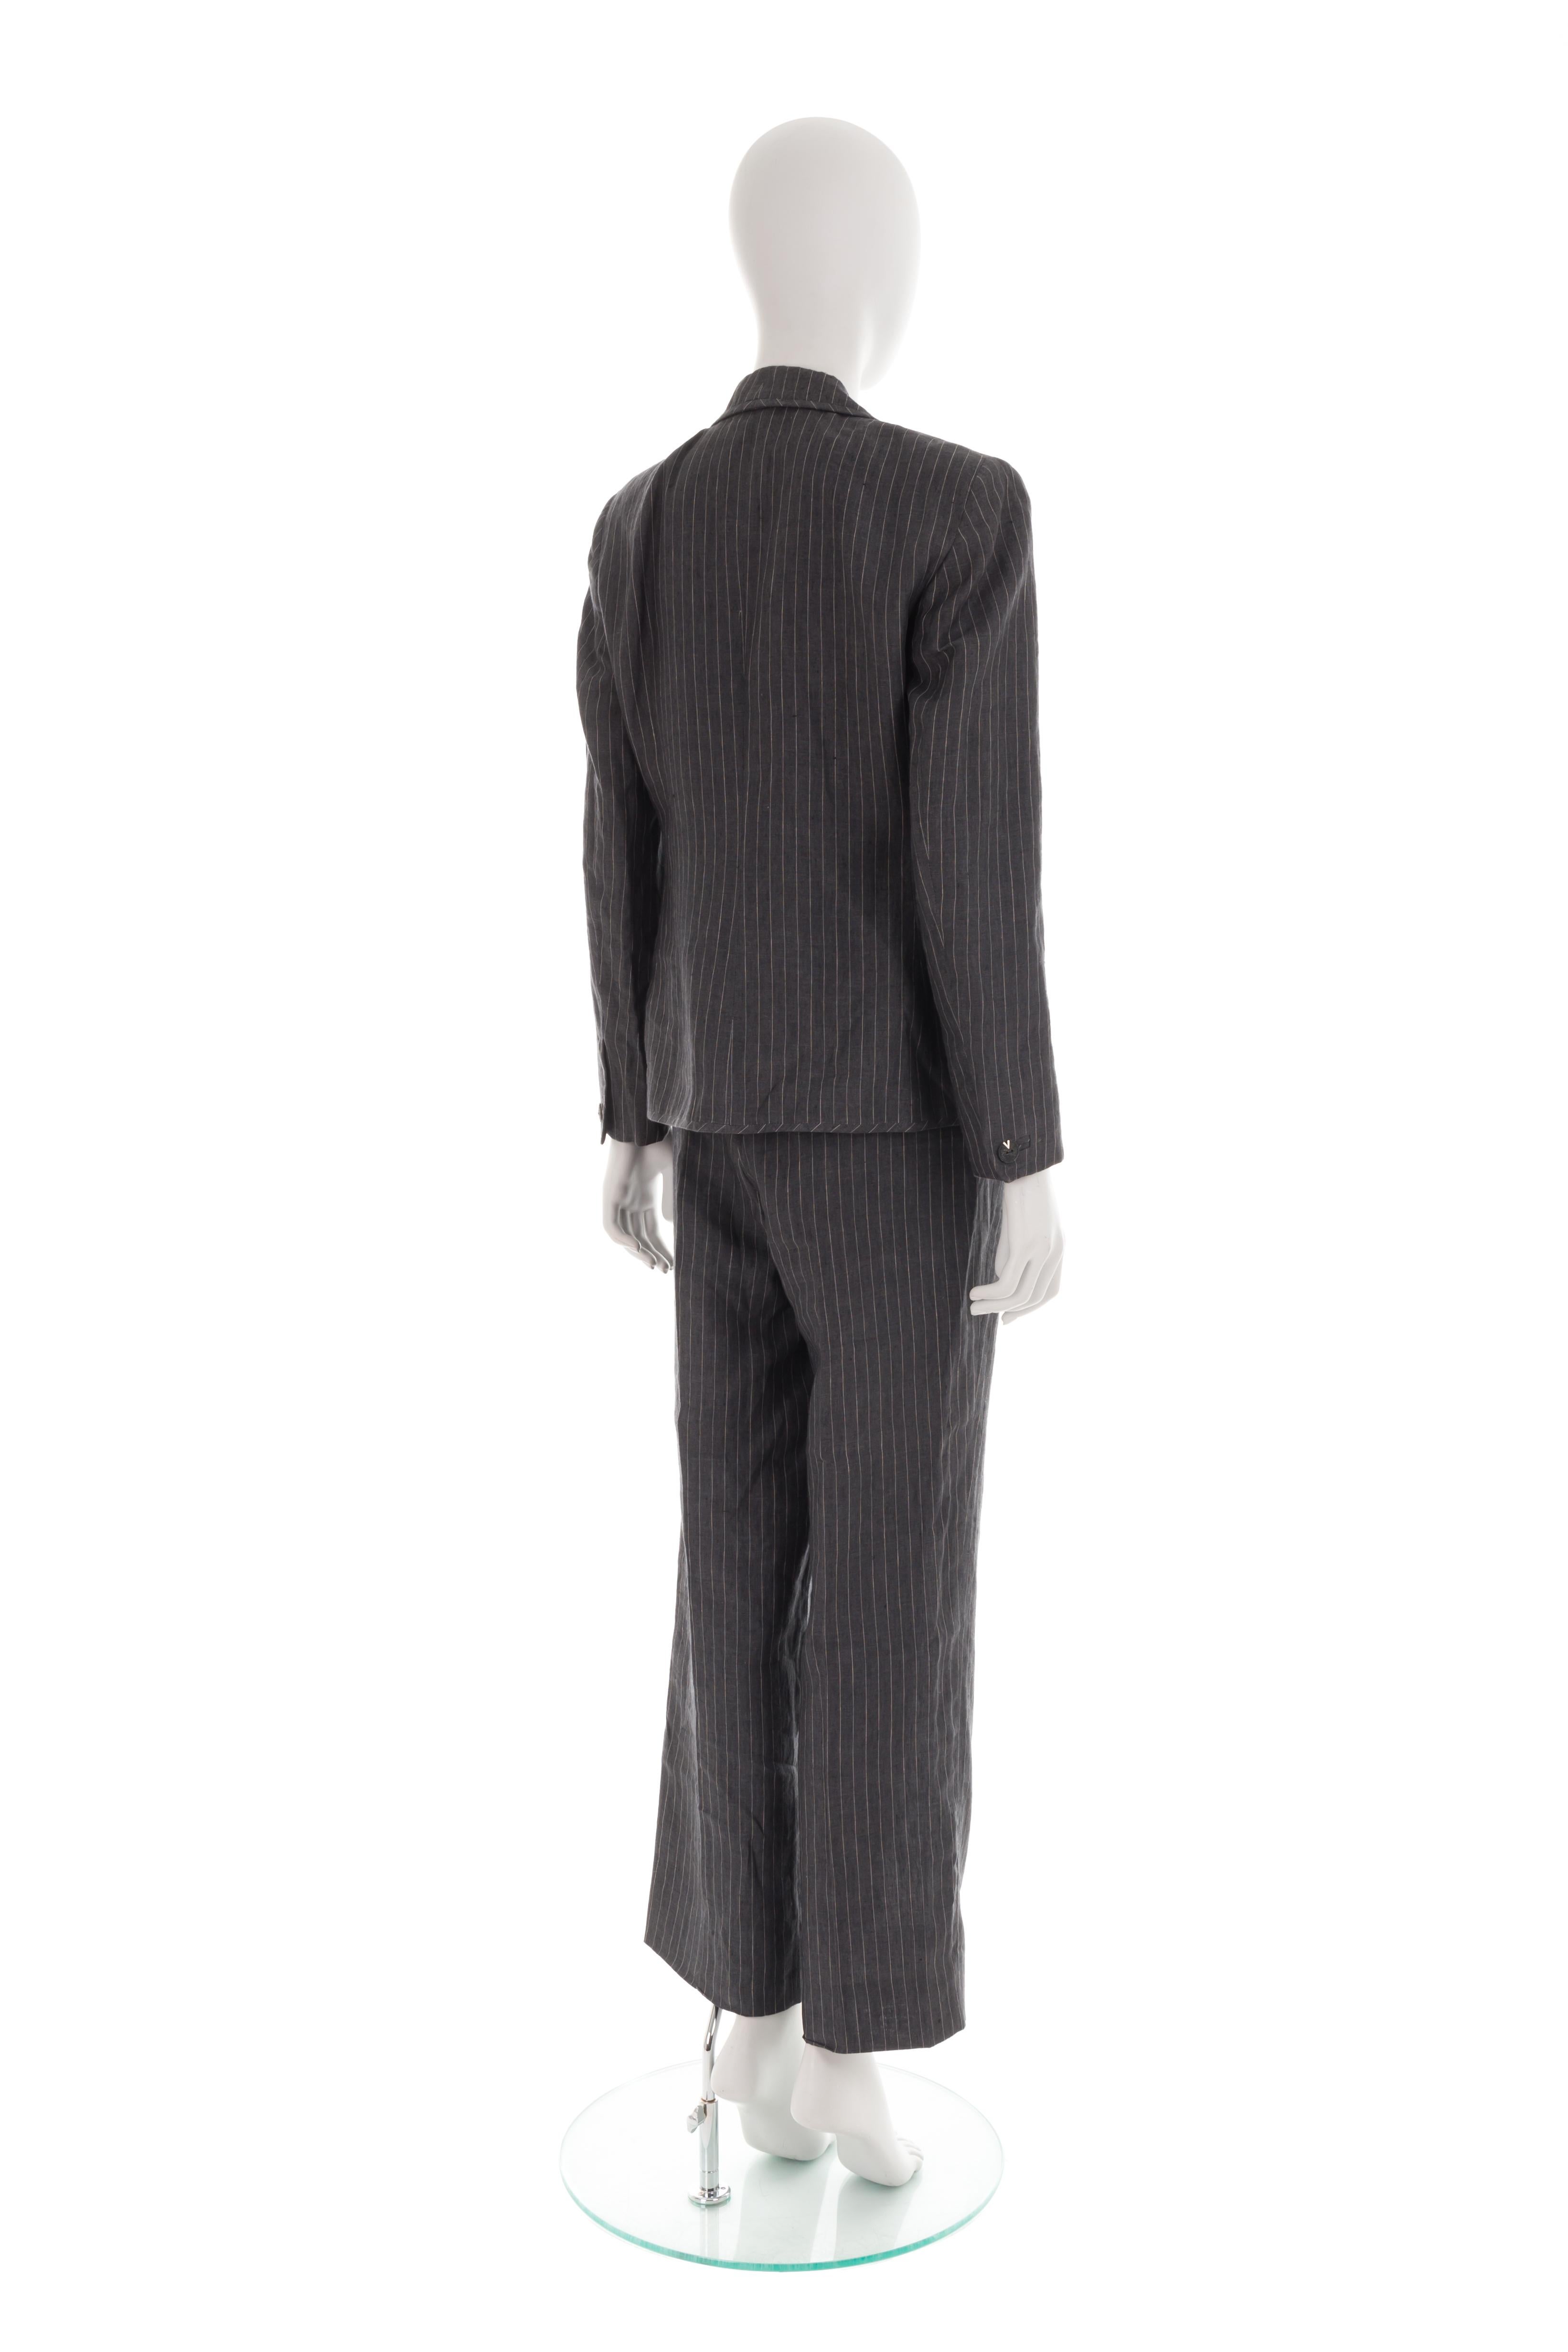 Gianni Versace F/W 1998 grey pinstripe linen suit with logo mini belt In Excellent Condition For Sale In Rome, IT